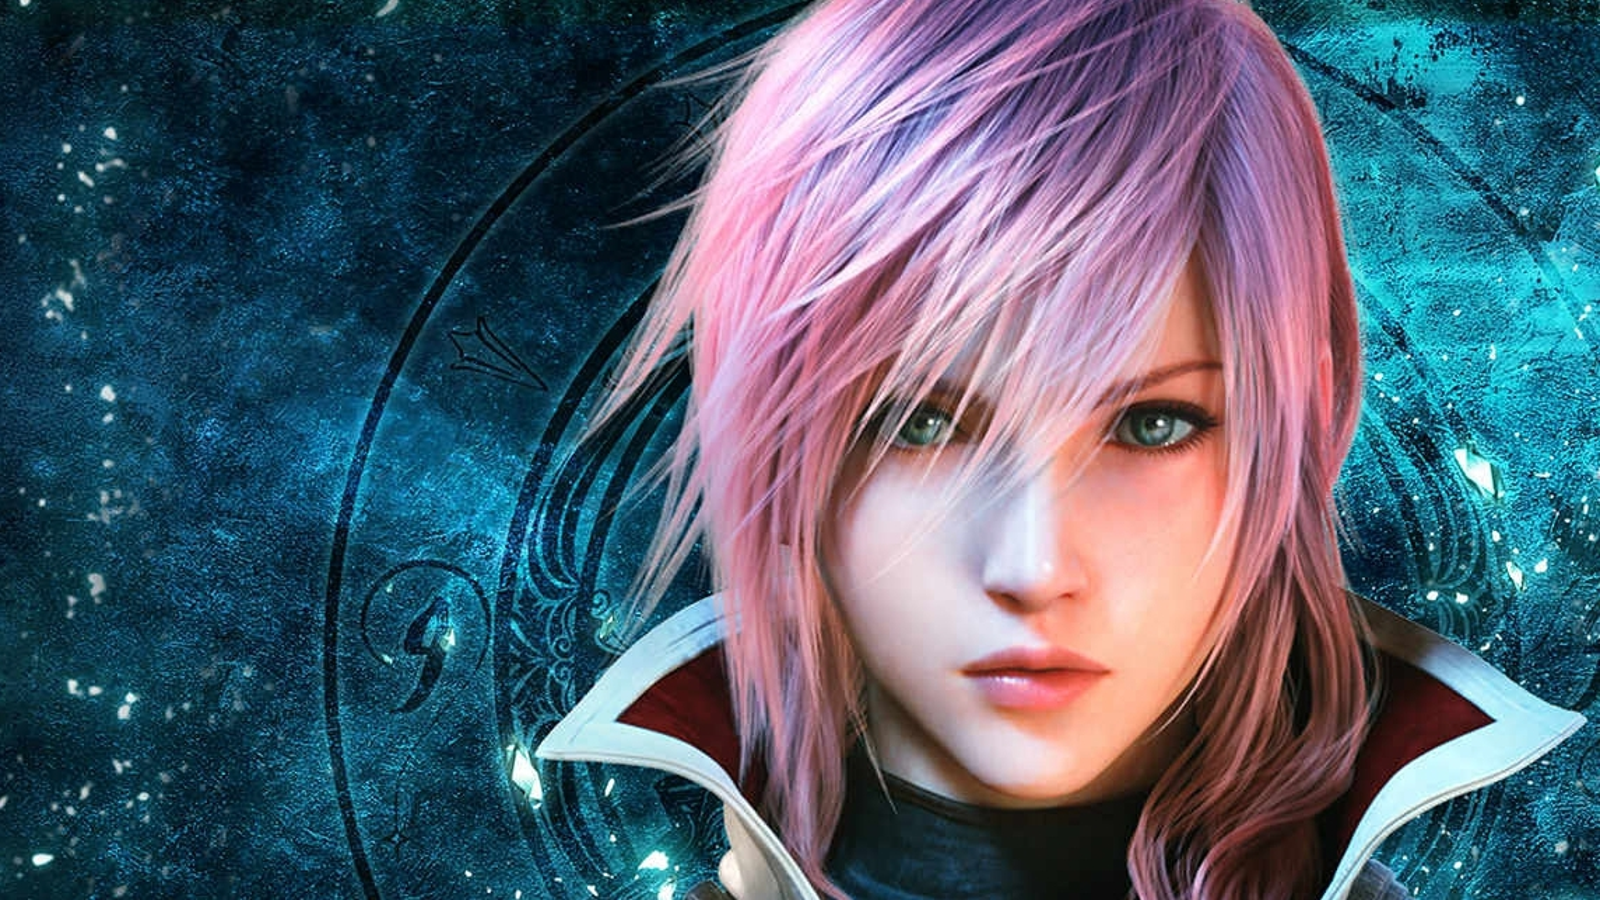 Square Enix Europe: “FINAL FANTASY XIII-2 Community Day Was a Huge